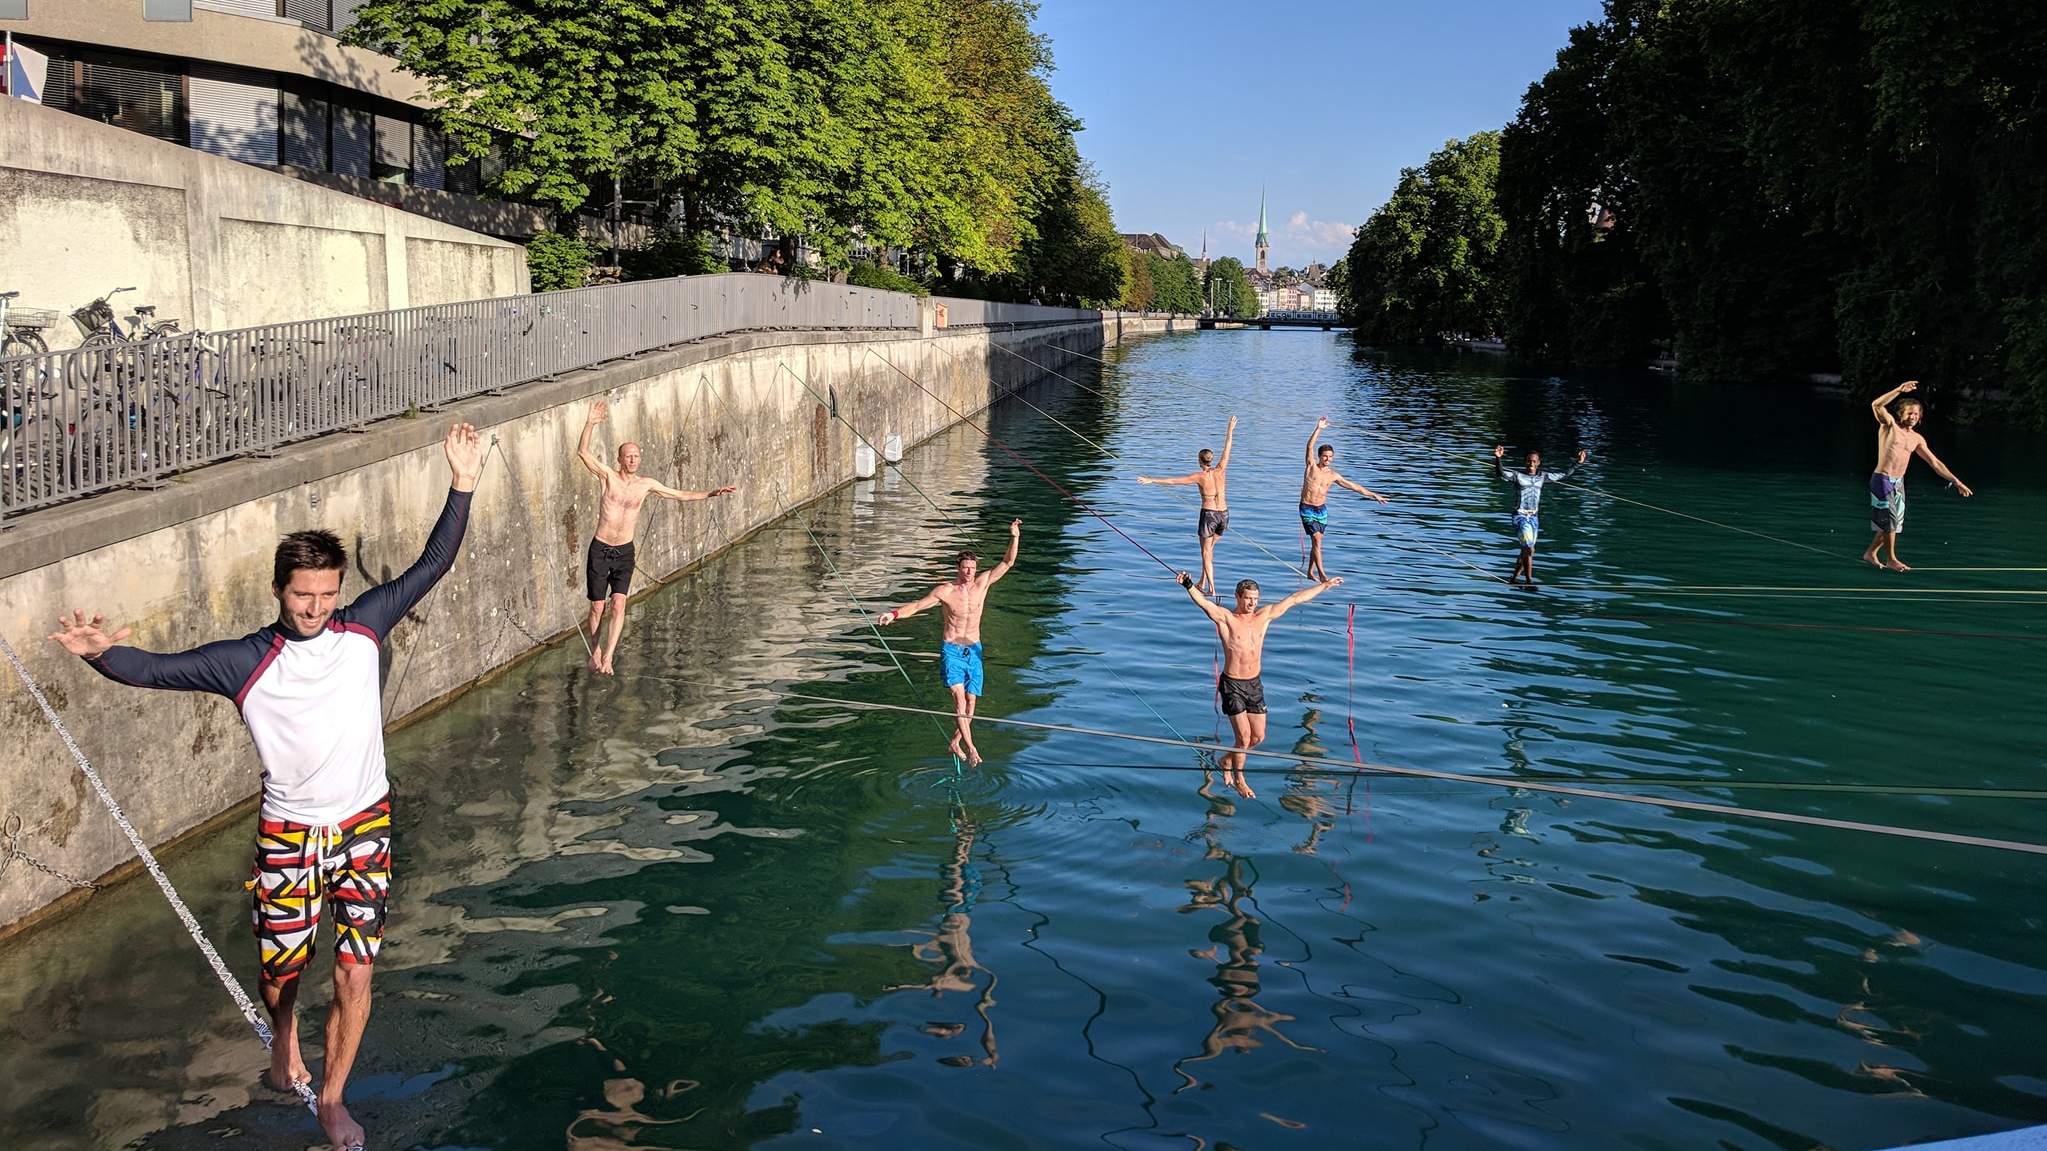 Our main waterline spot in the heart of Zurich.